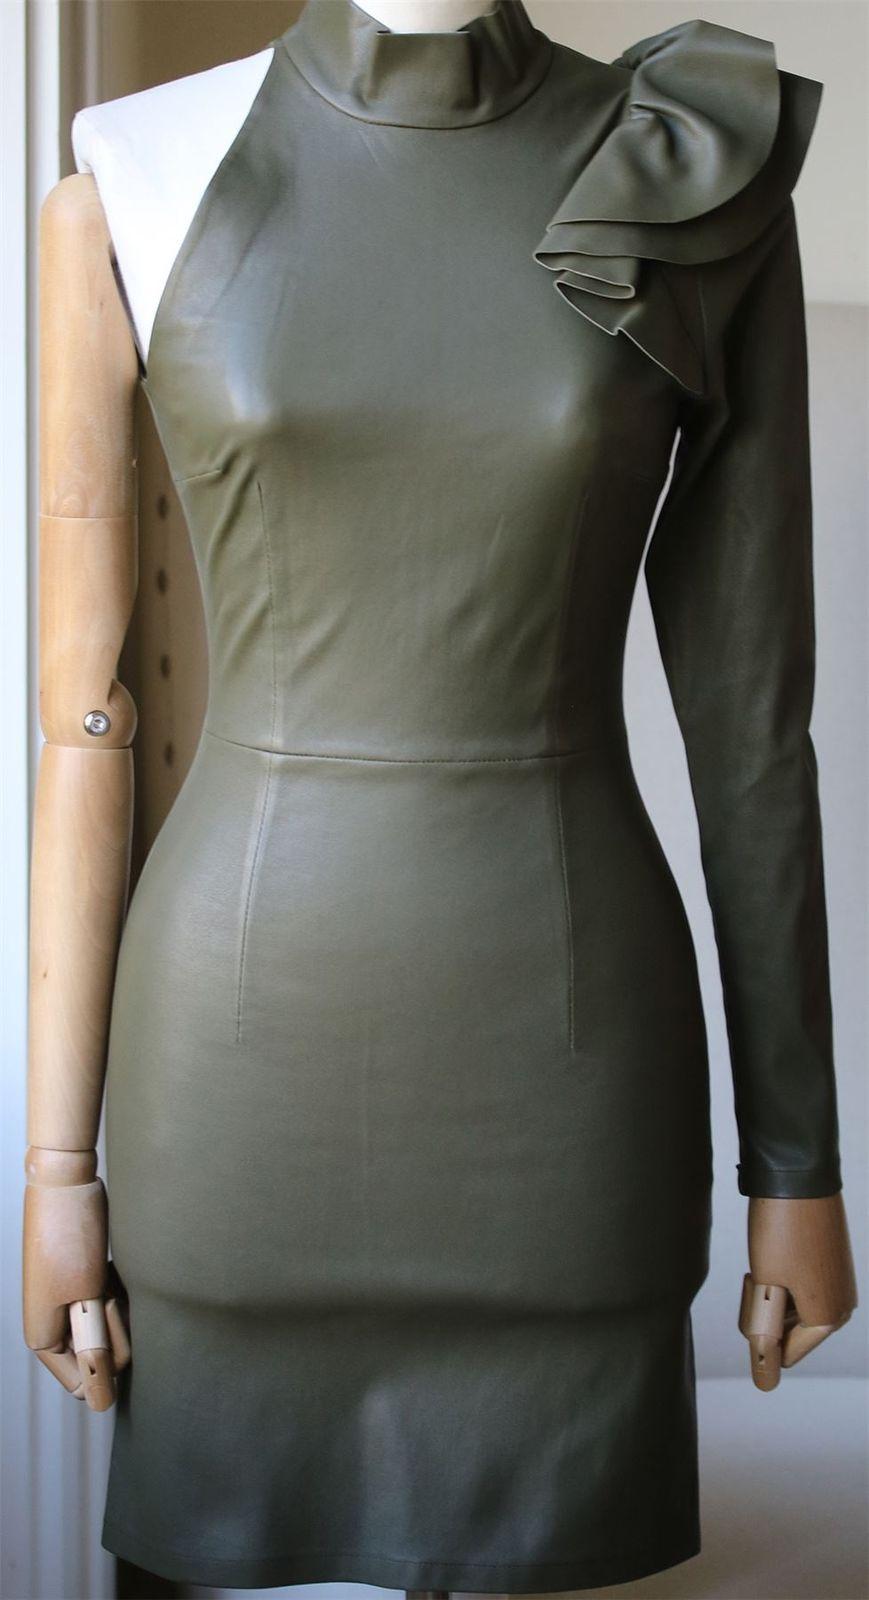 Zeynep Arçay leather dress's skintight material will make you look amazing, while the details — one long sleeve, turtleneck, and shoulder ruffles - will add a high-fashion edge to your look... 100% stretch lamb skin. Color: Olive Green.

Size: FR 36